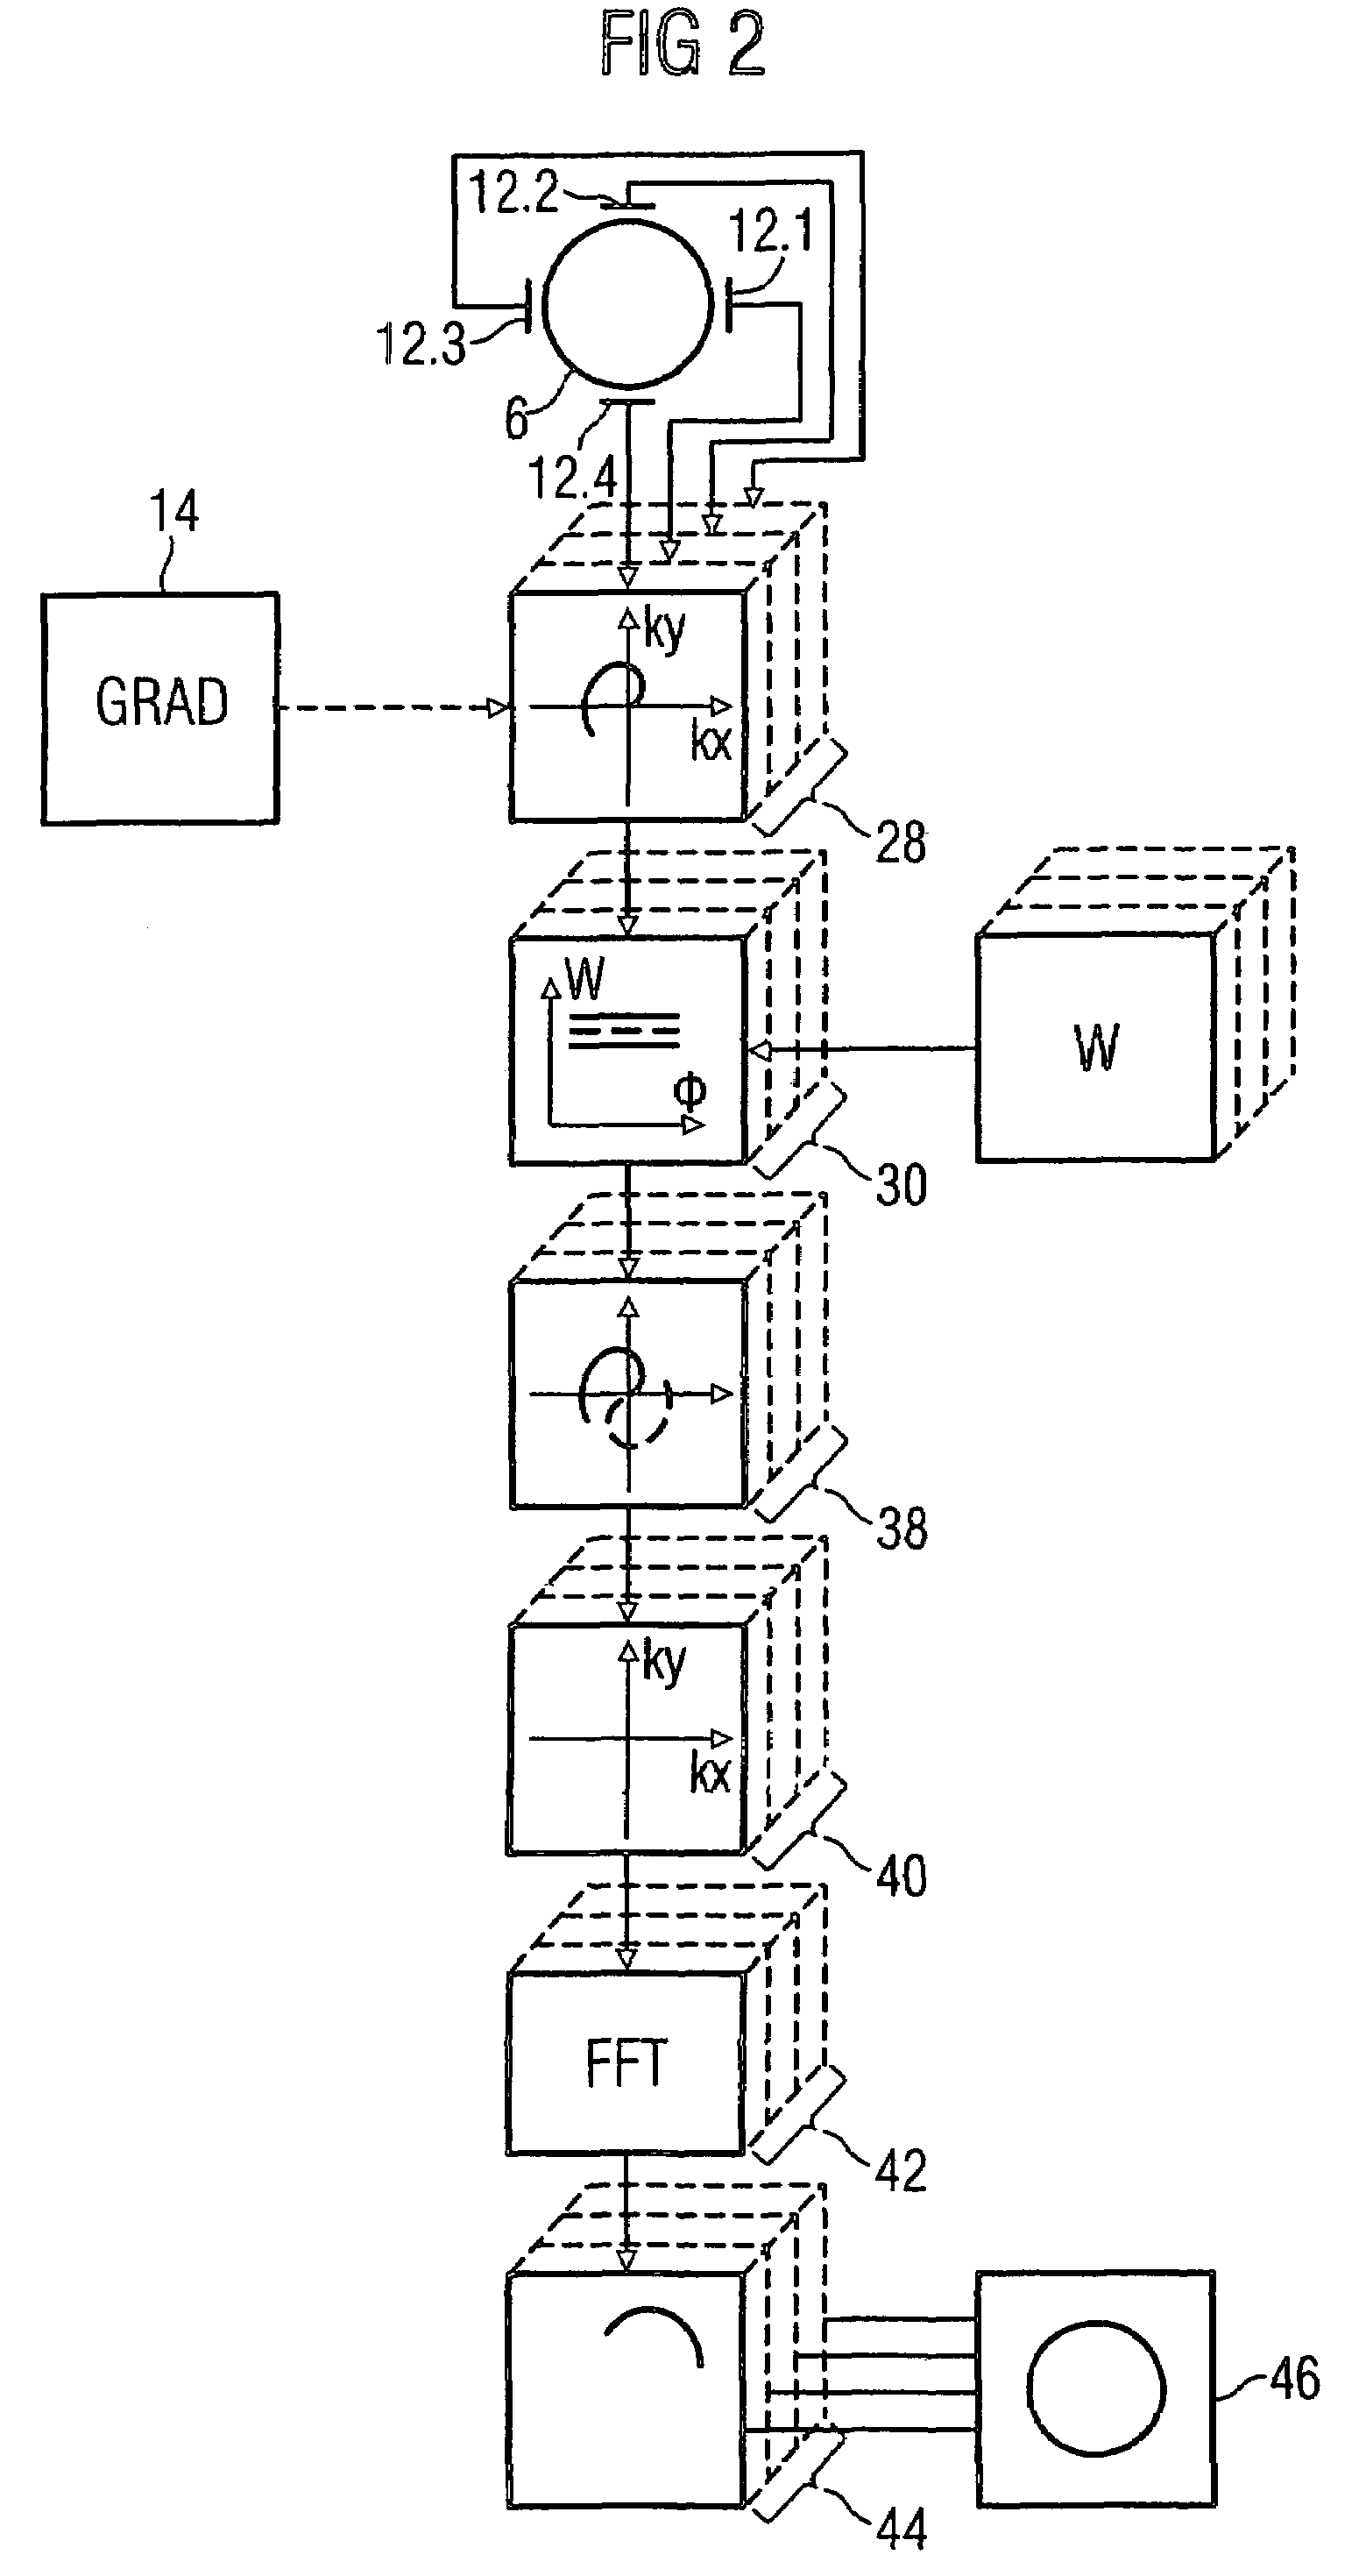 Magnetic resonance imaging method using a partial parallel acquisition technique with non-Cartesian occupation of k-space